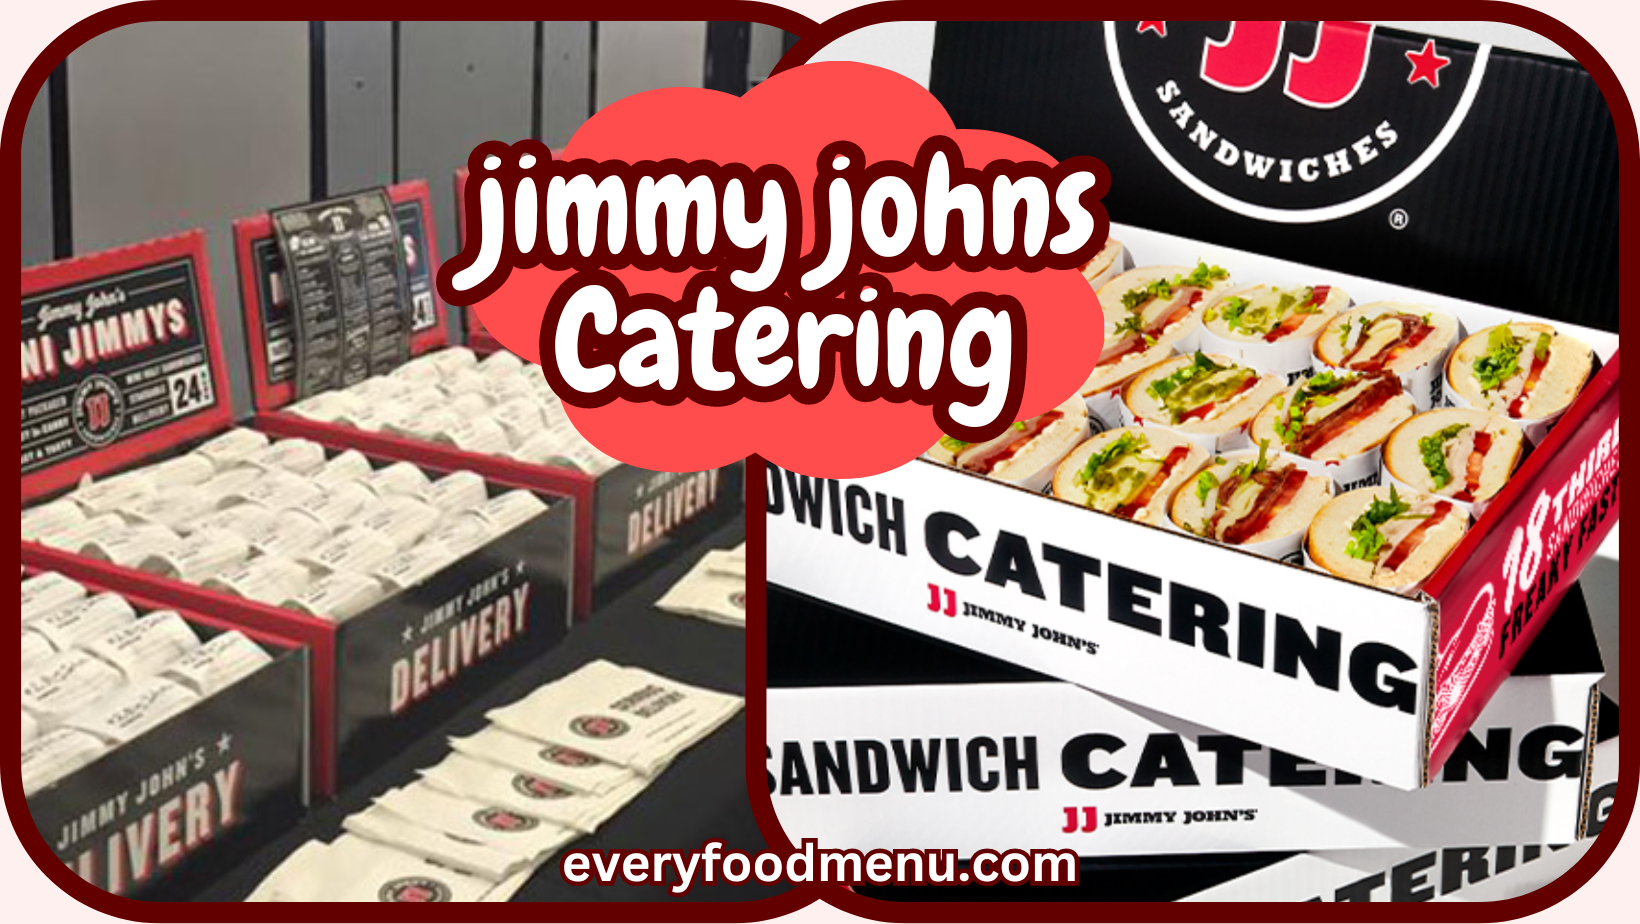 jimmy johns Catering